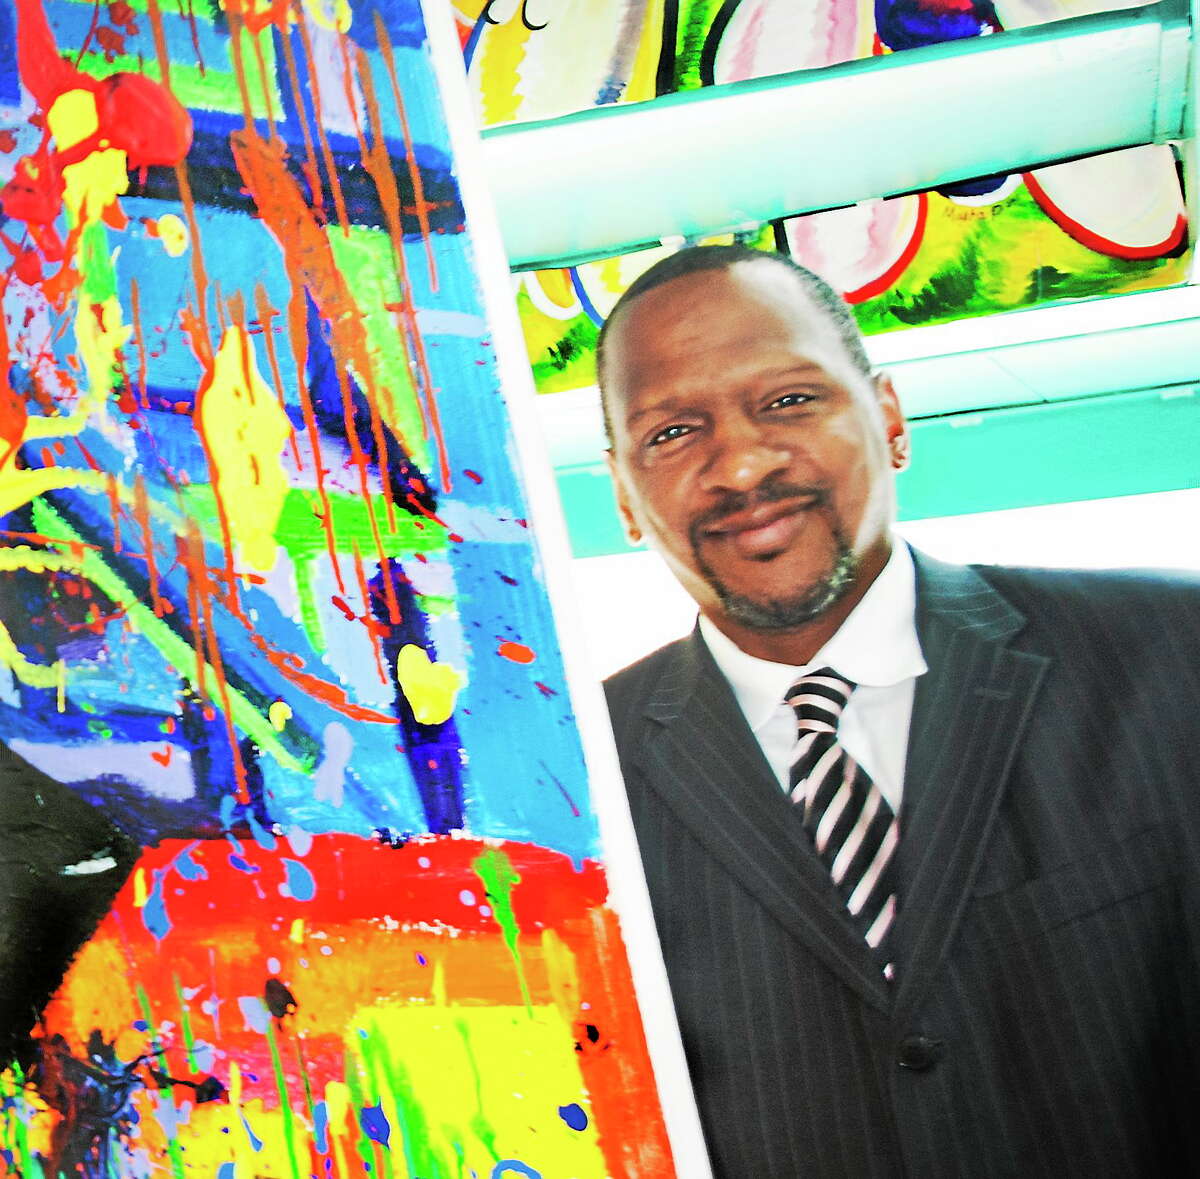 Hamden High School Principal Gary Highsmith in May 2014, next to a portion of a piece by senior Alicia Pascale in a student art show.